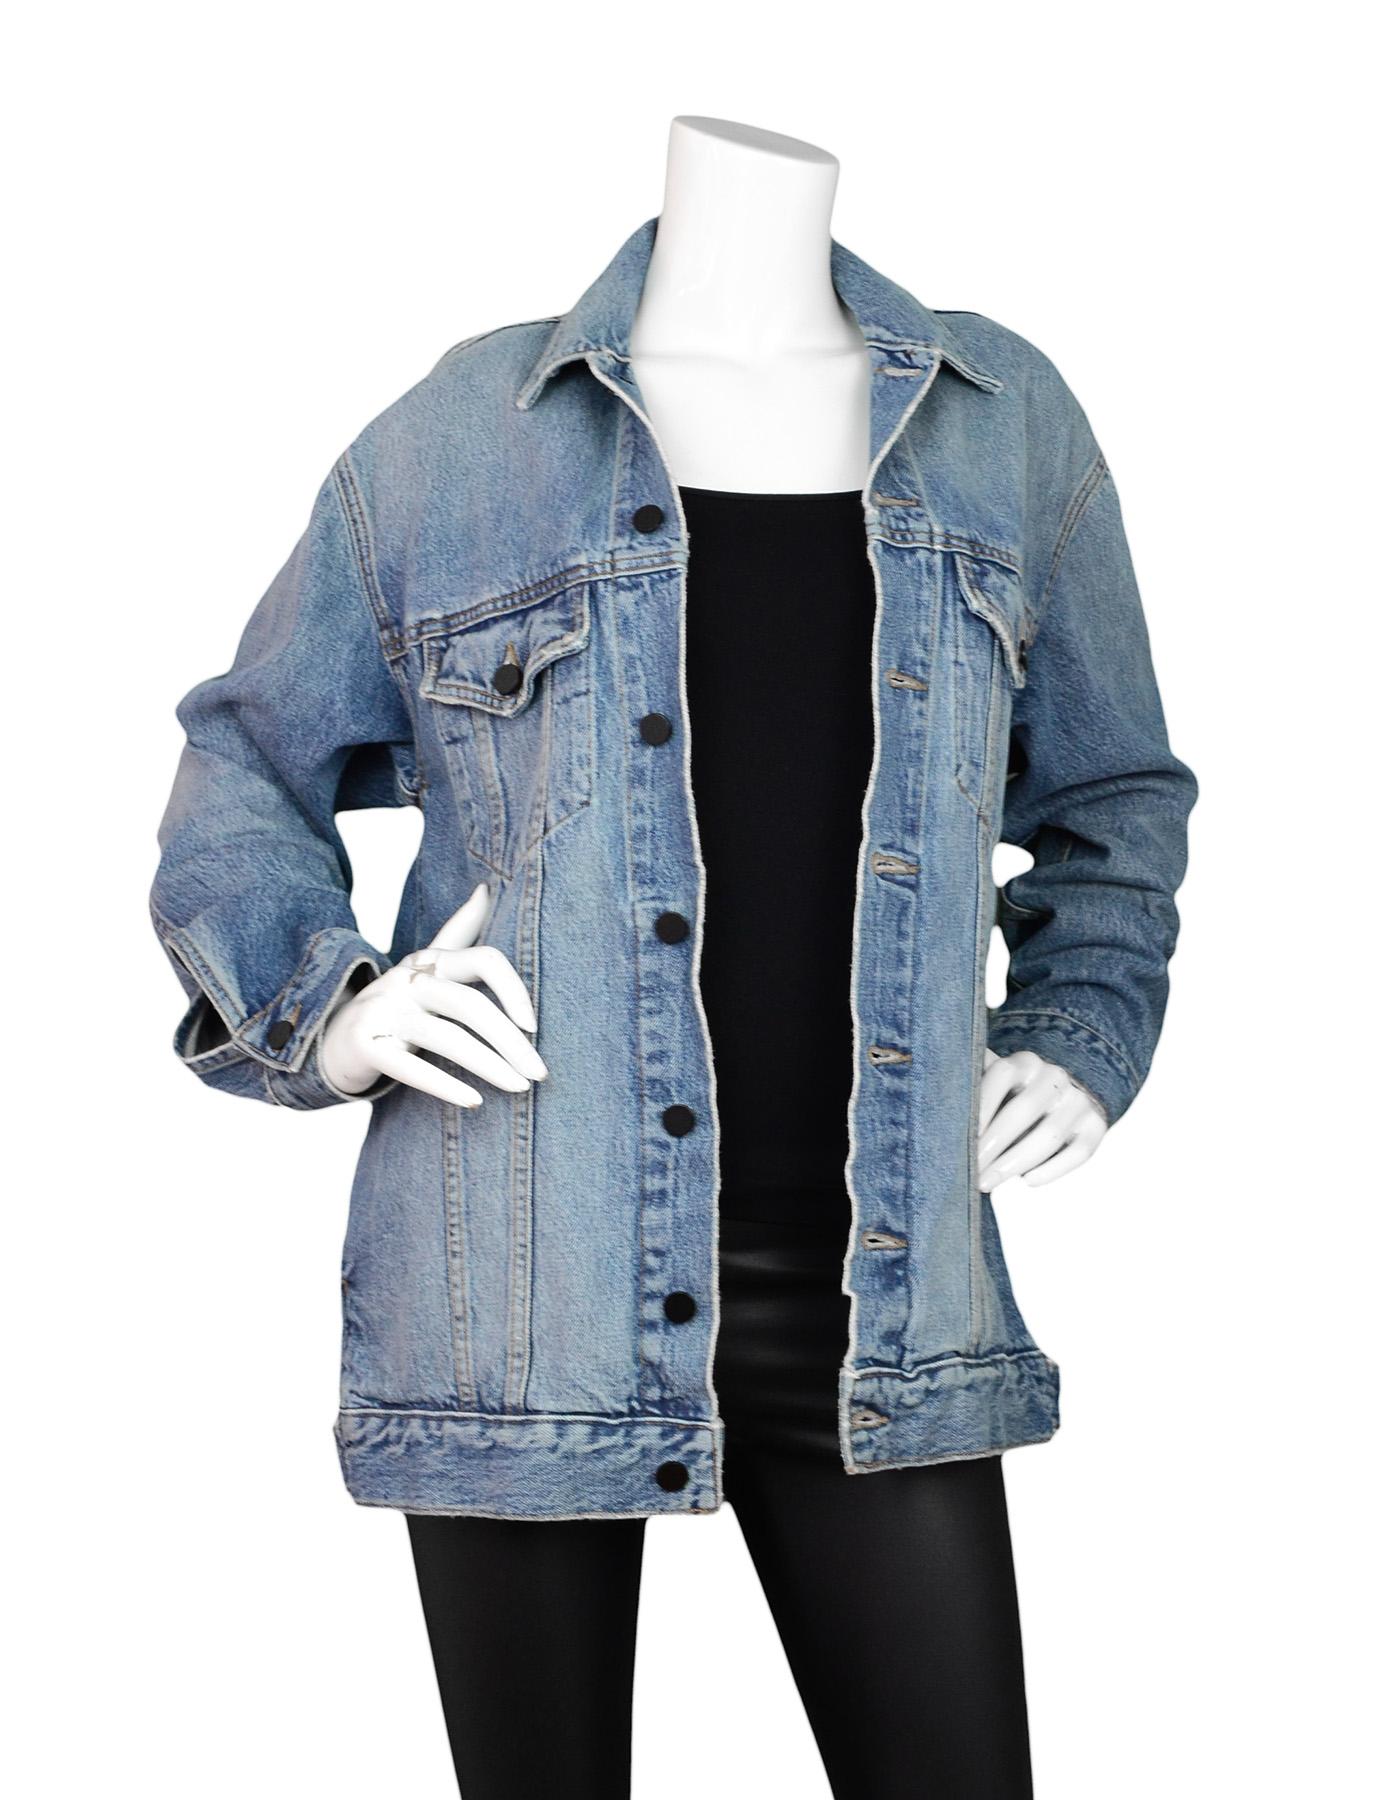 Alexander Wang Blue Daze Oversized Denim Jacket 

Made In: USA
Color: Distressed blue 
Composition: Outer- 100% cotton / Pocketing/pouches-65% cotton 35% polyester
Lining: None
Closure/Opening: Button closure 
Exterior Pockets: Two button patch